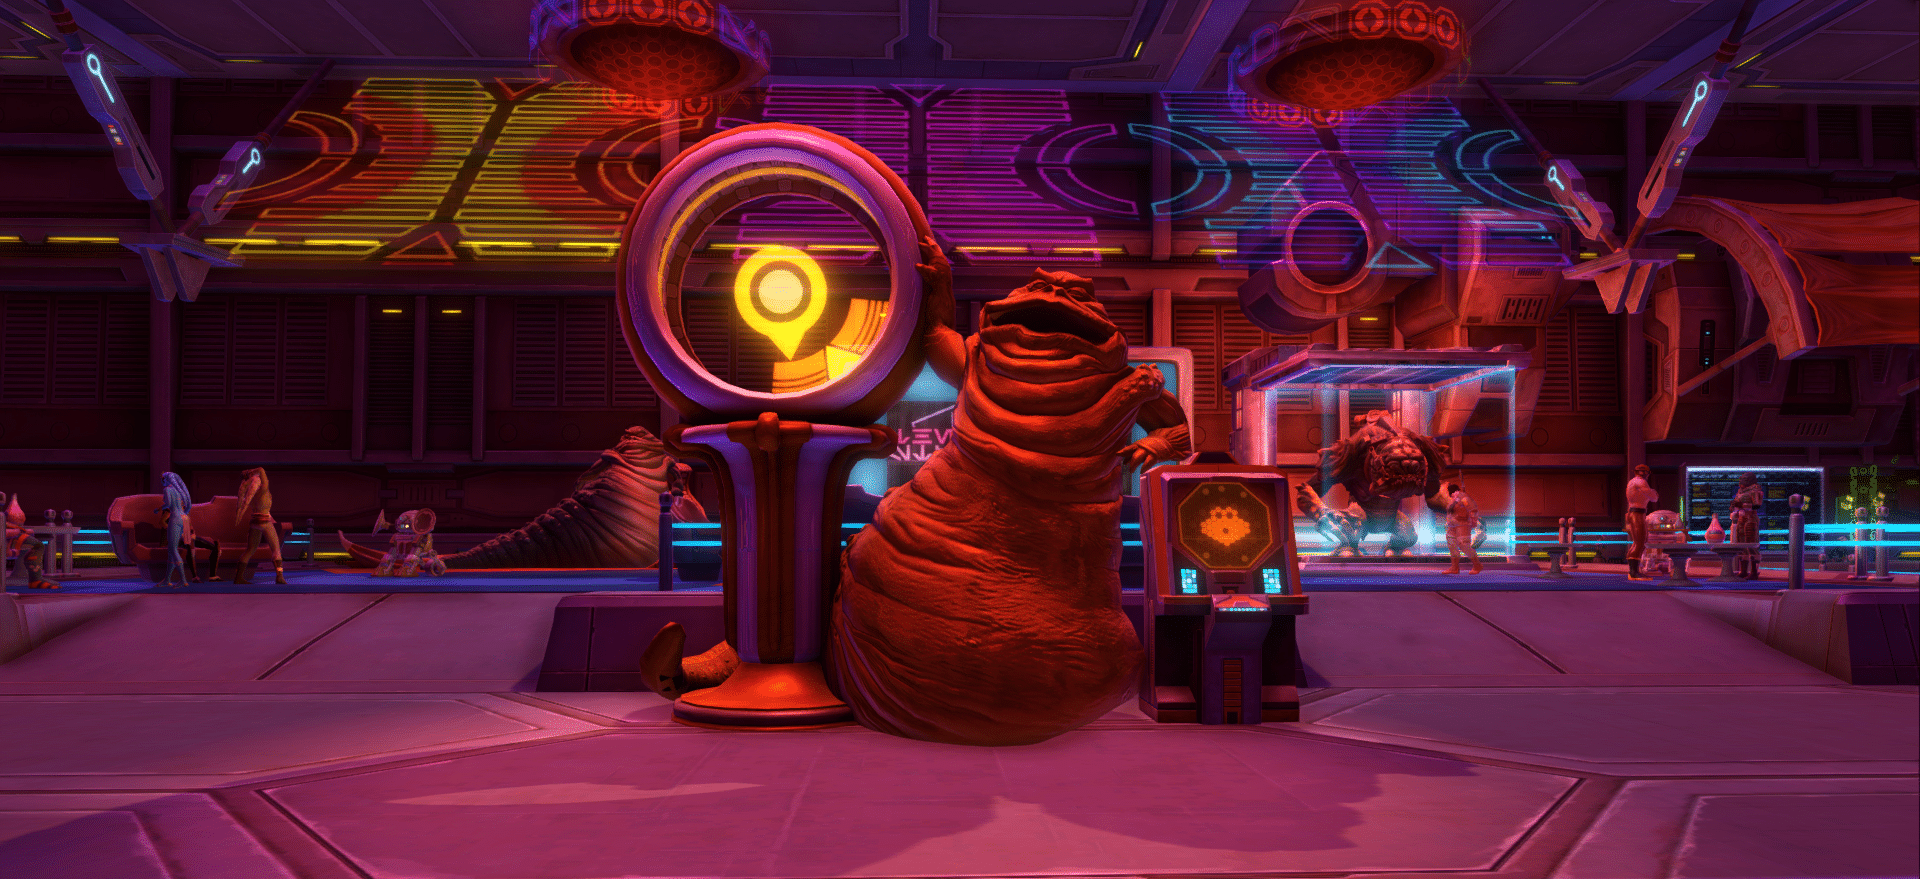 SWTOR In-Game Events – June 2021